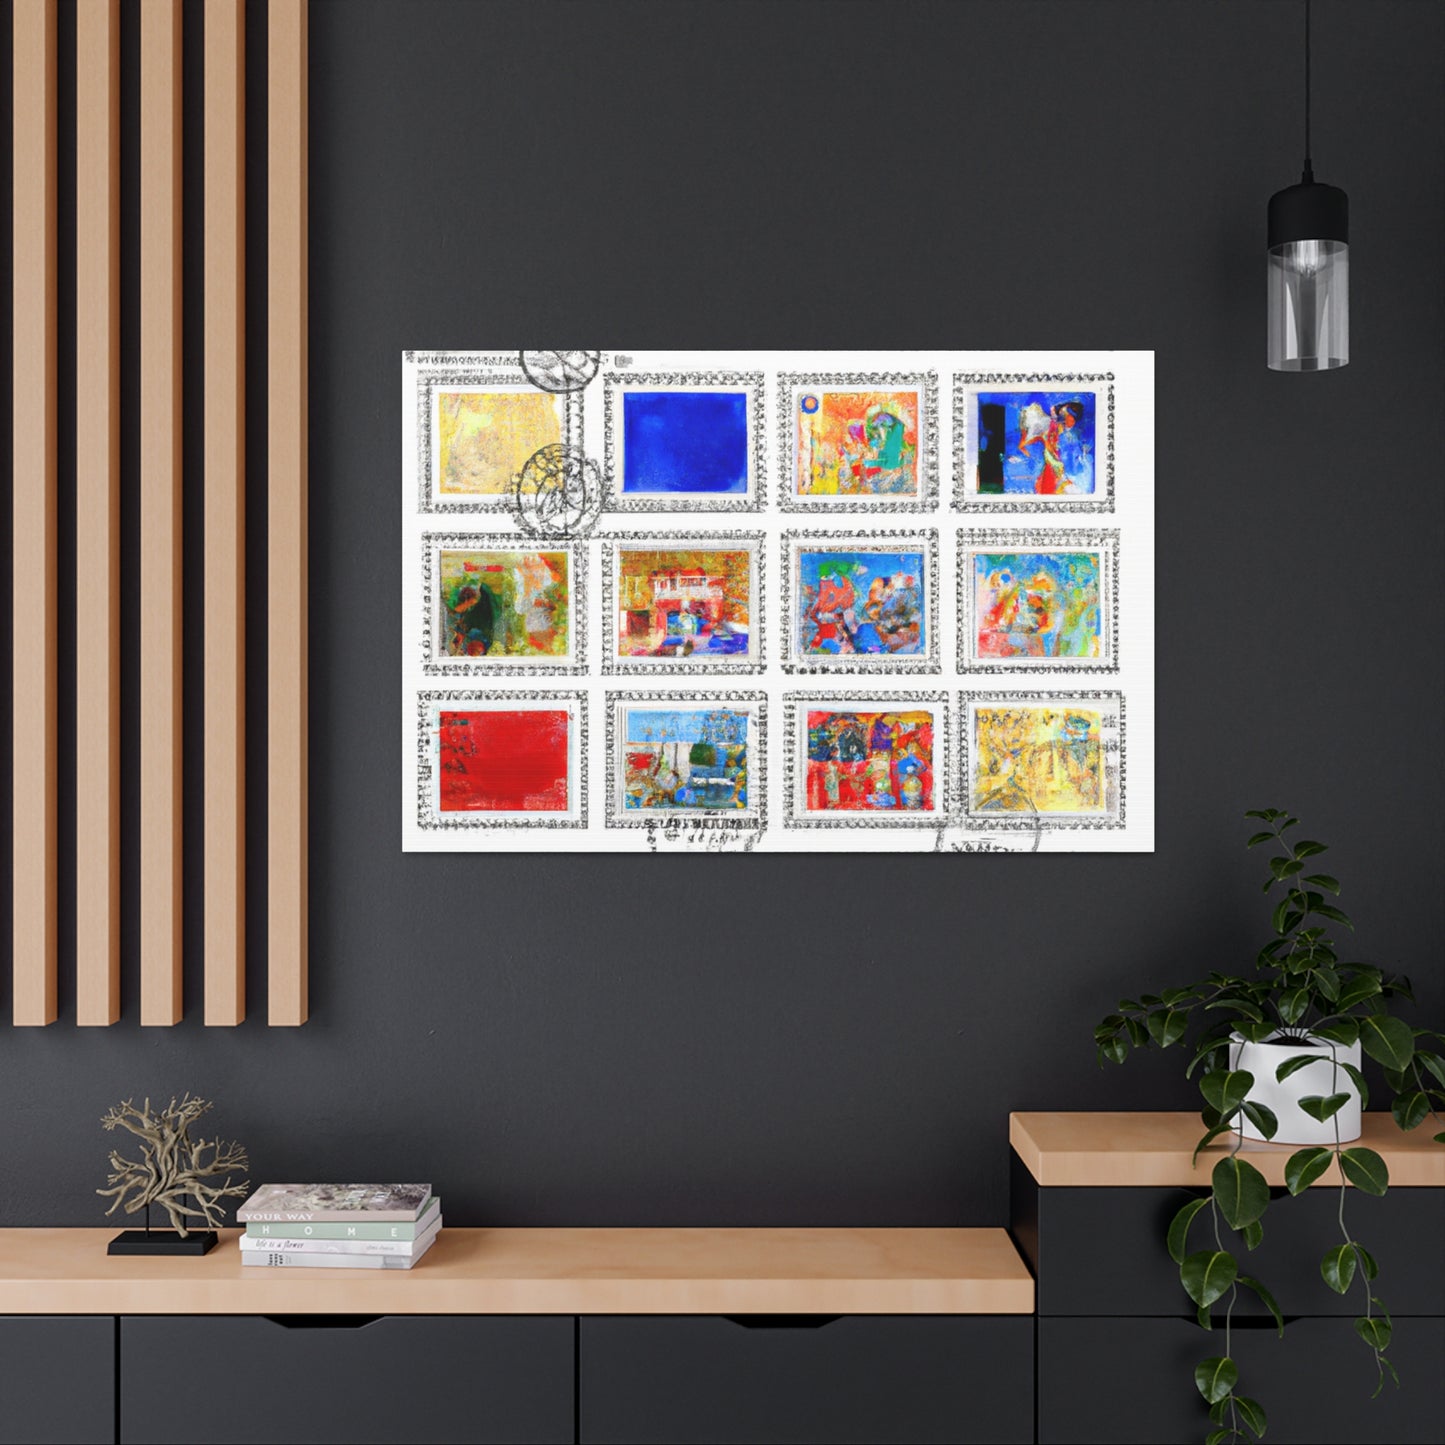 Global stamp collection: Voyageurs Around the World. - Postage Stamp Collector Canvas Wall Art